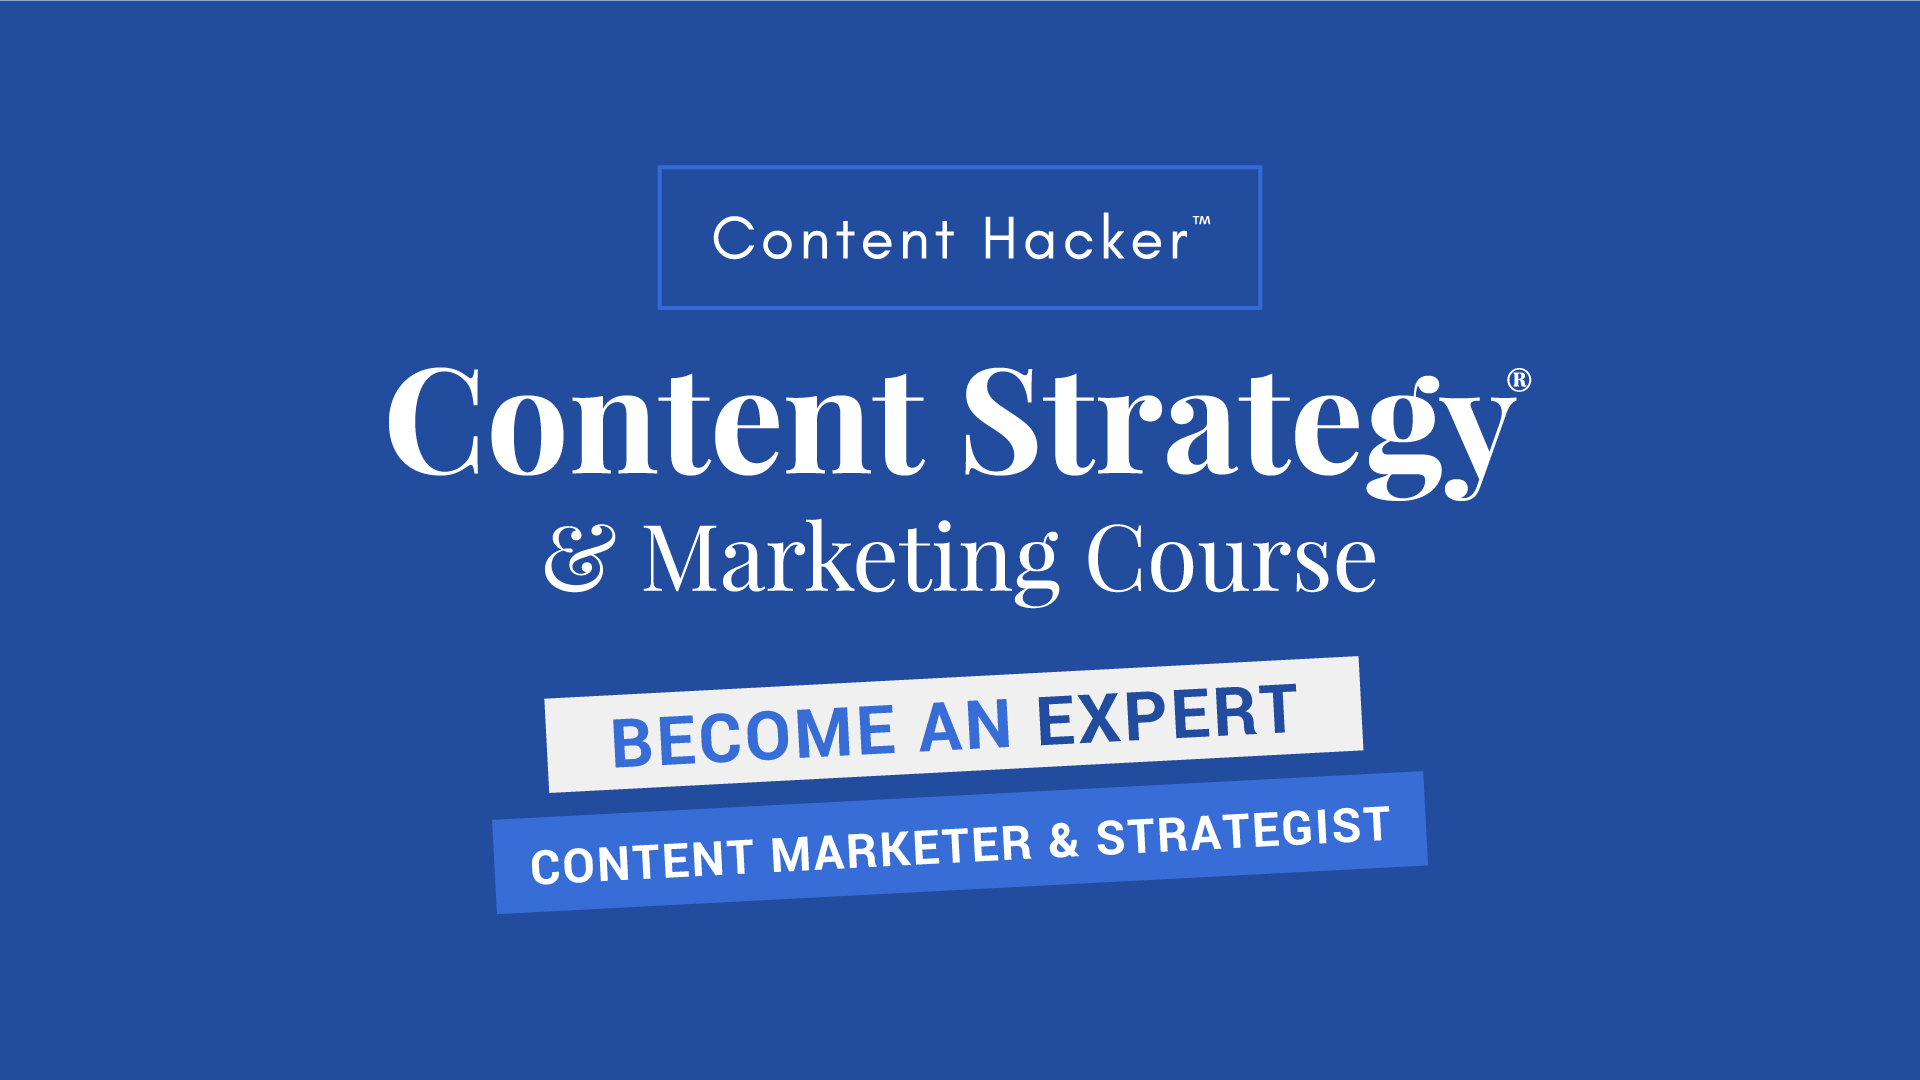 The Content Strategy & Marketing Course